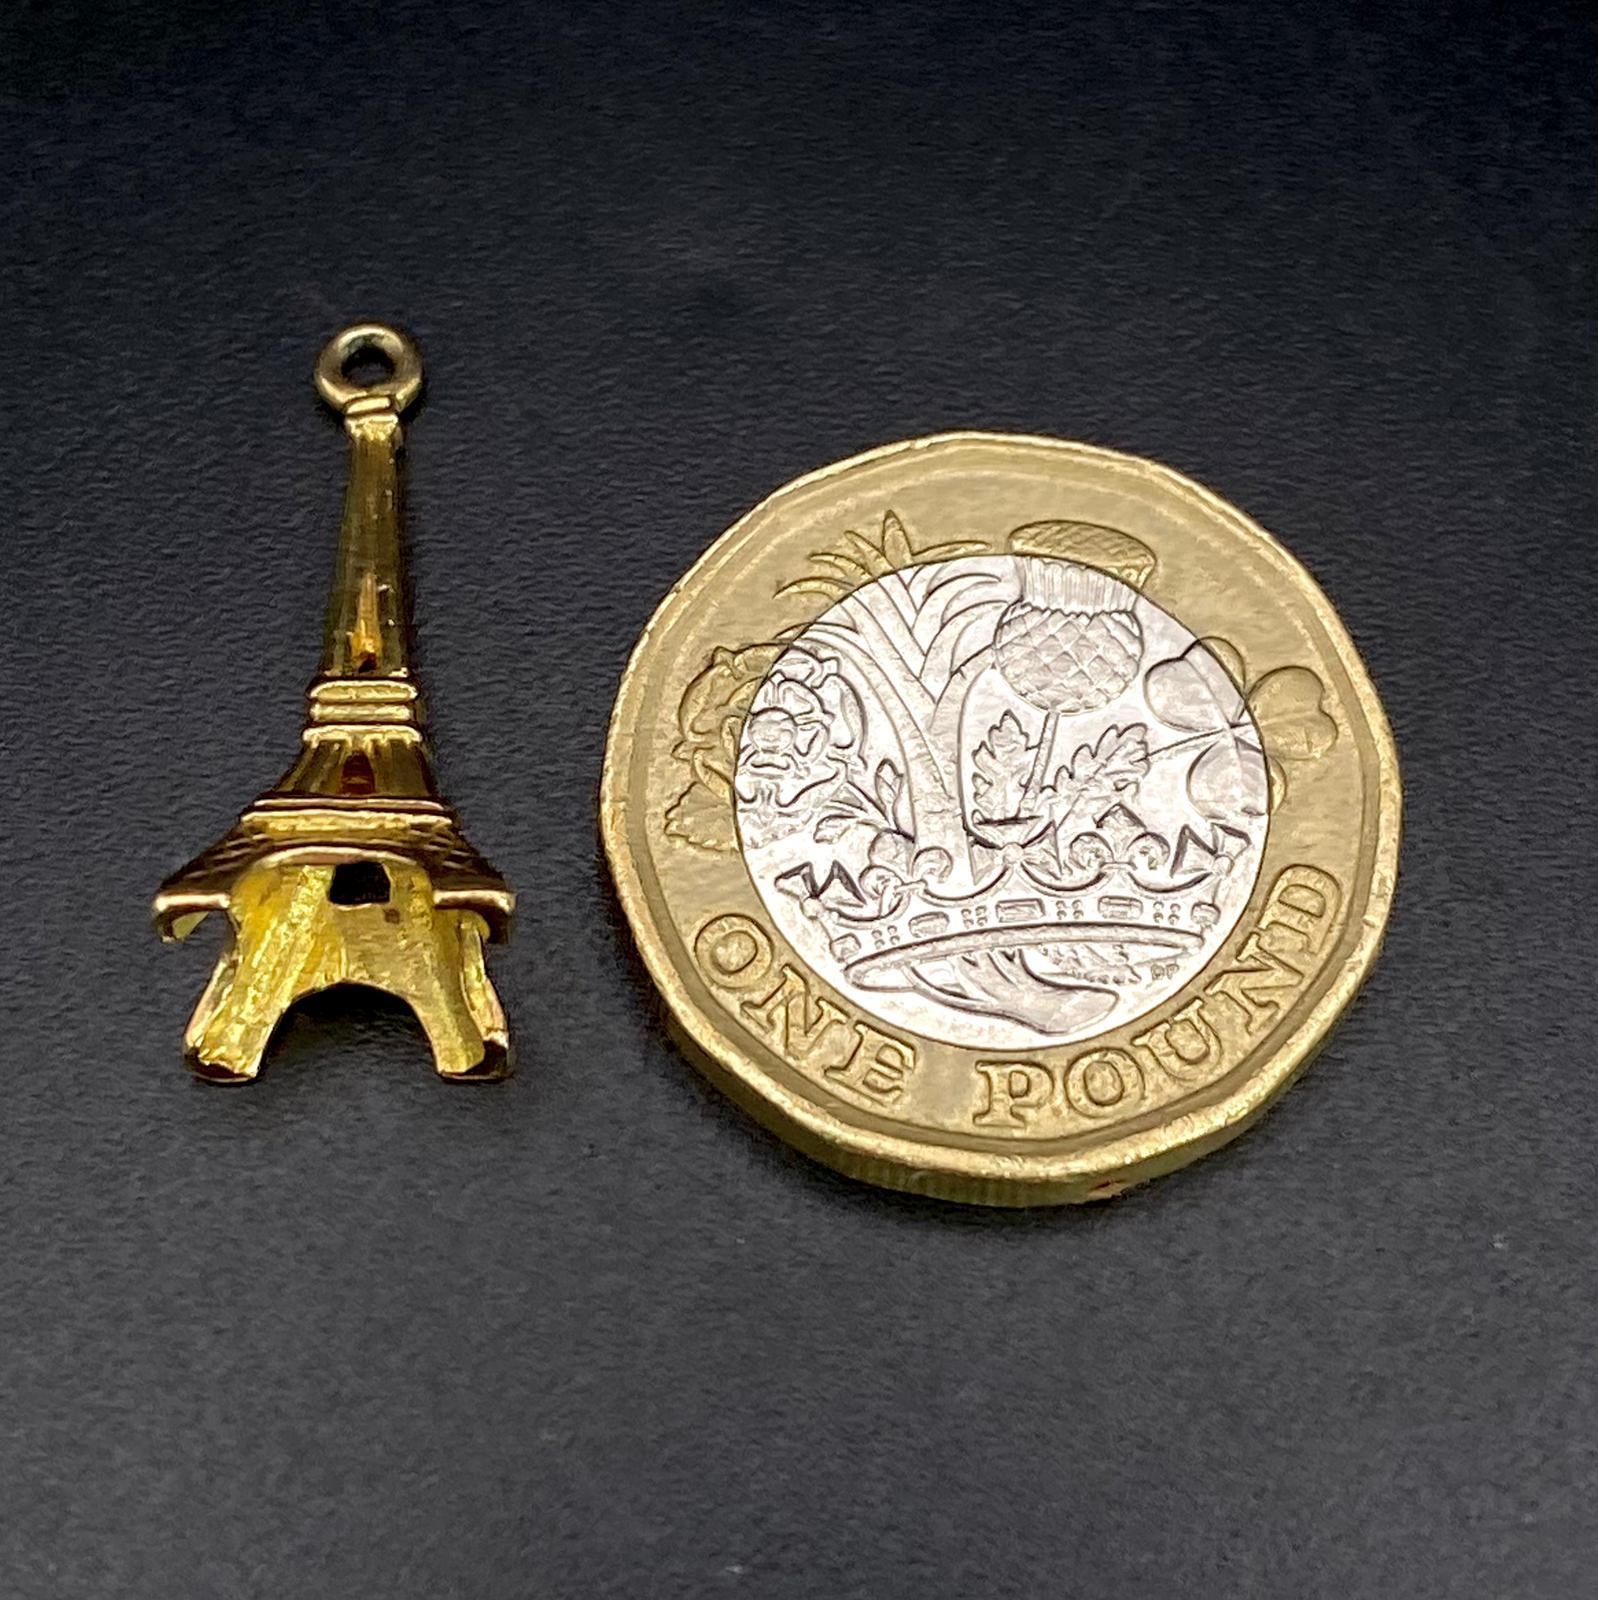 A 9K Yellow Gold Eiffel Tower Pendant/Charm. 25mm. 1.45g weight. - Image 2 of 4